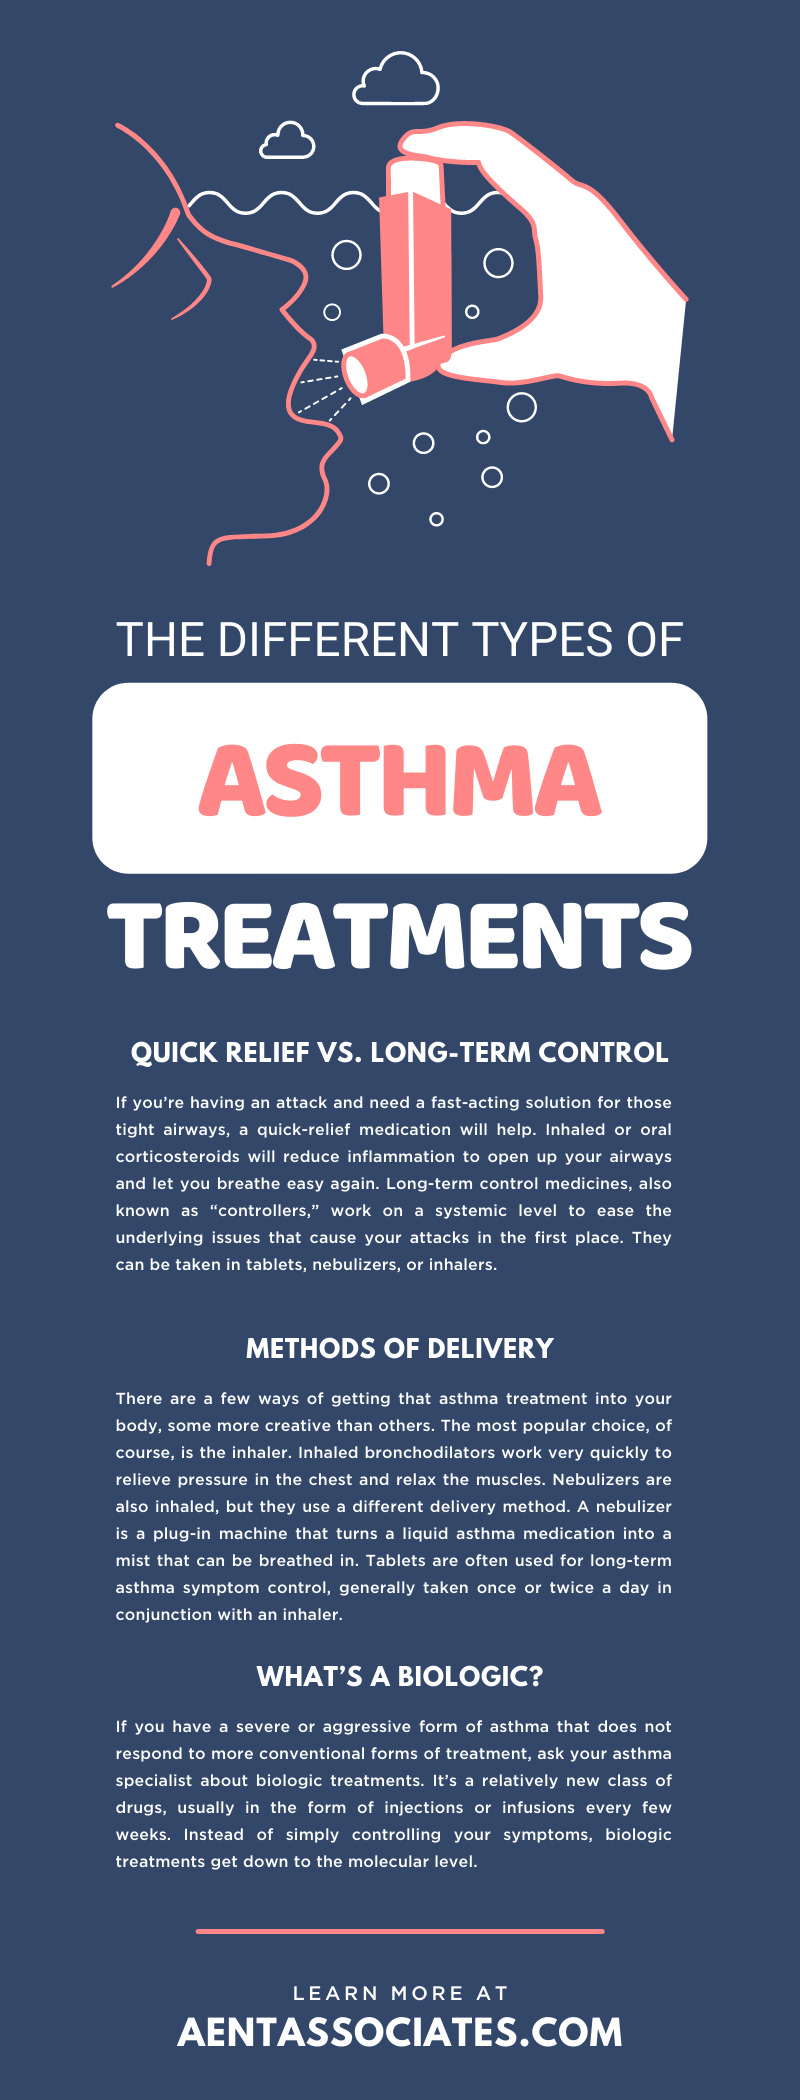 The Different Types of Asthma Treatments